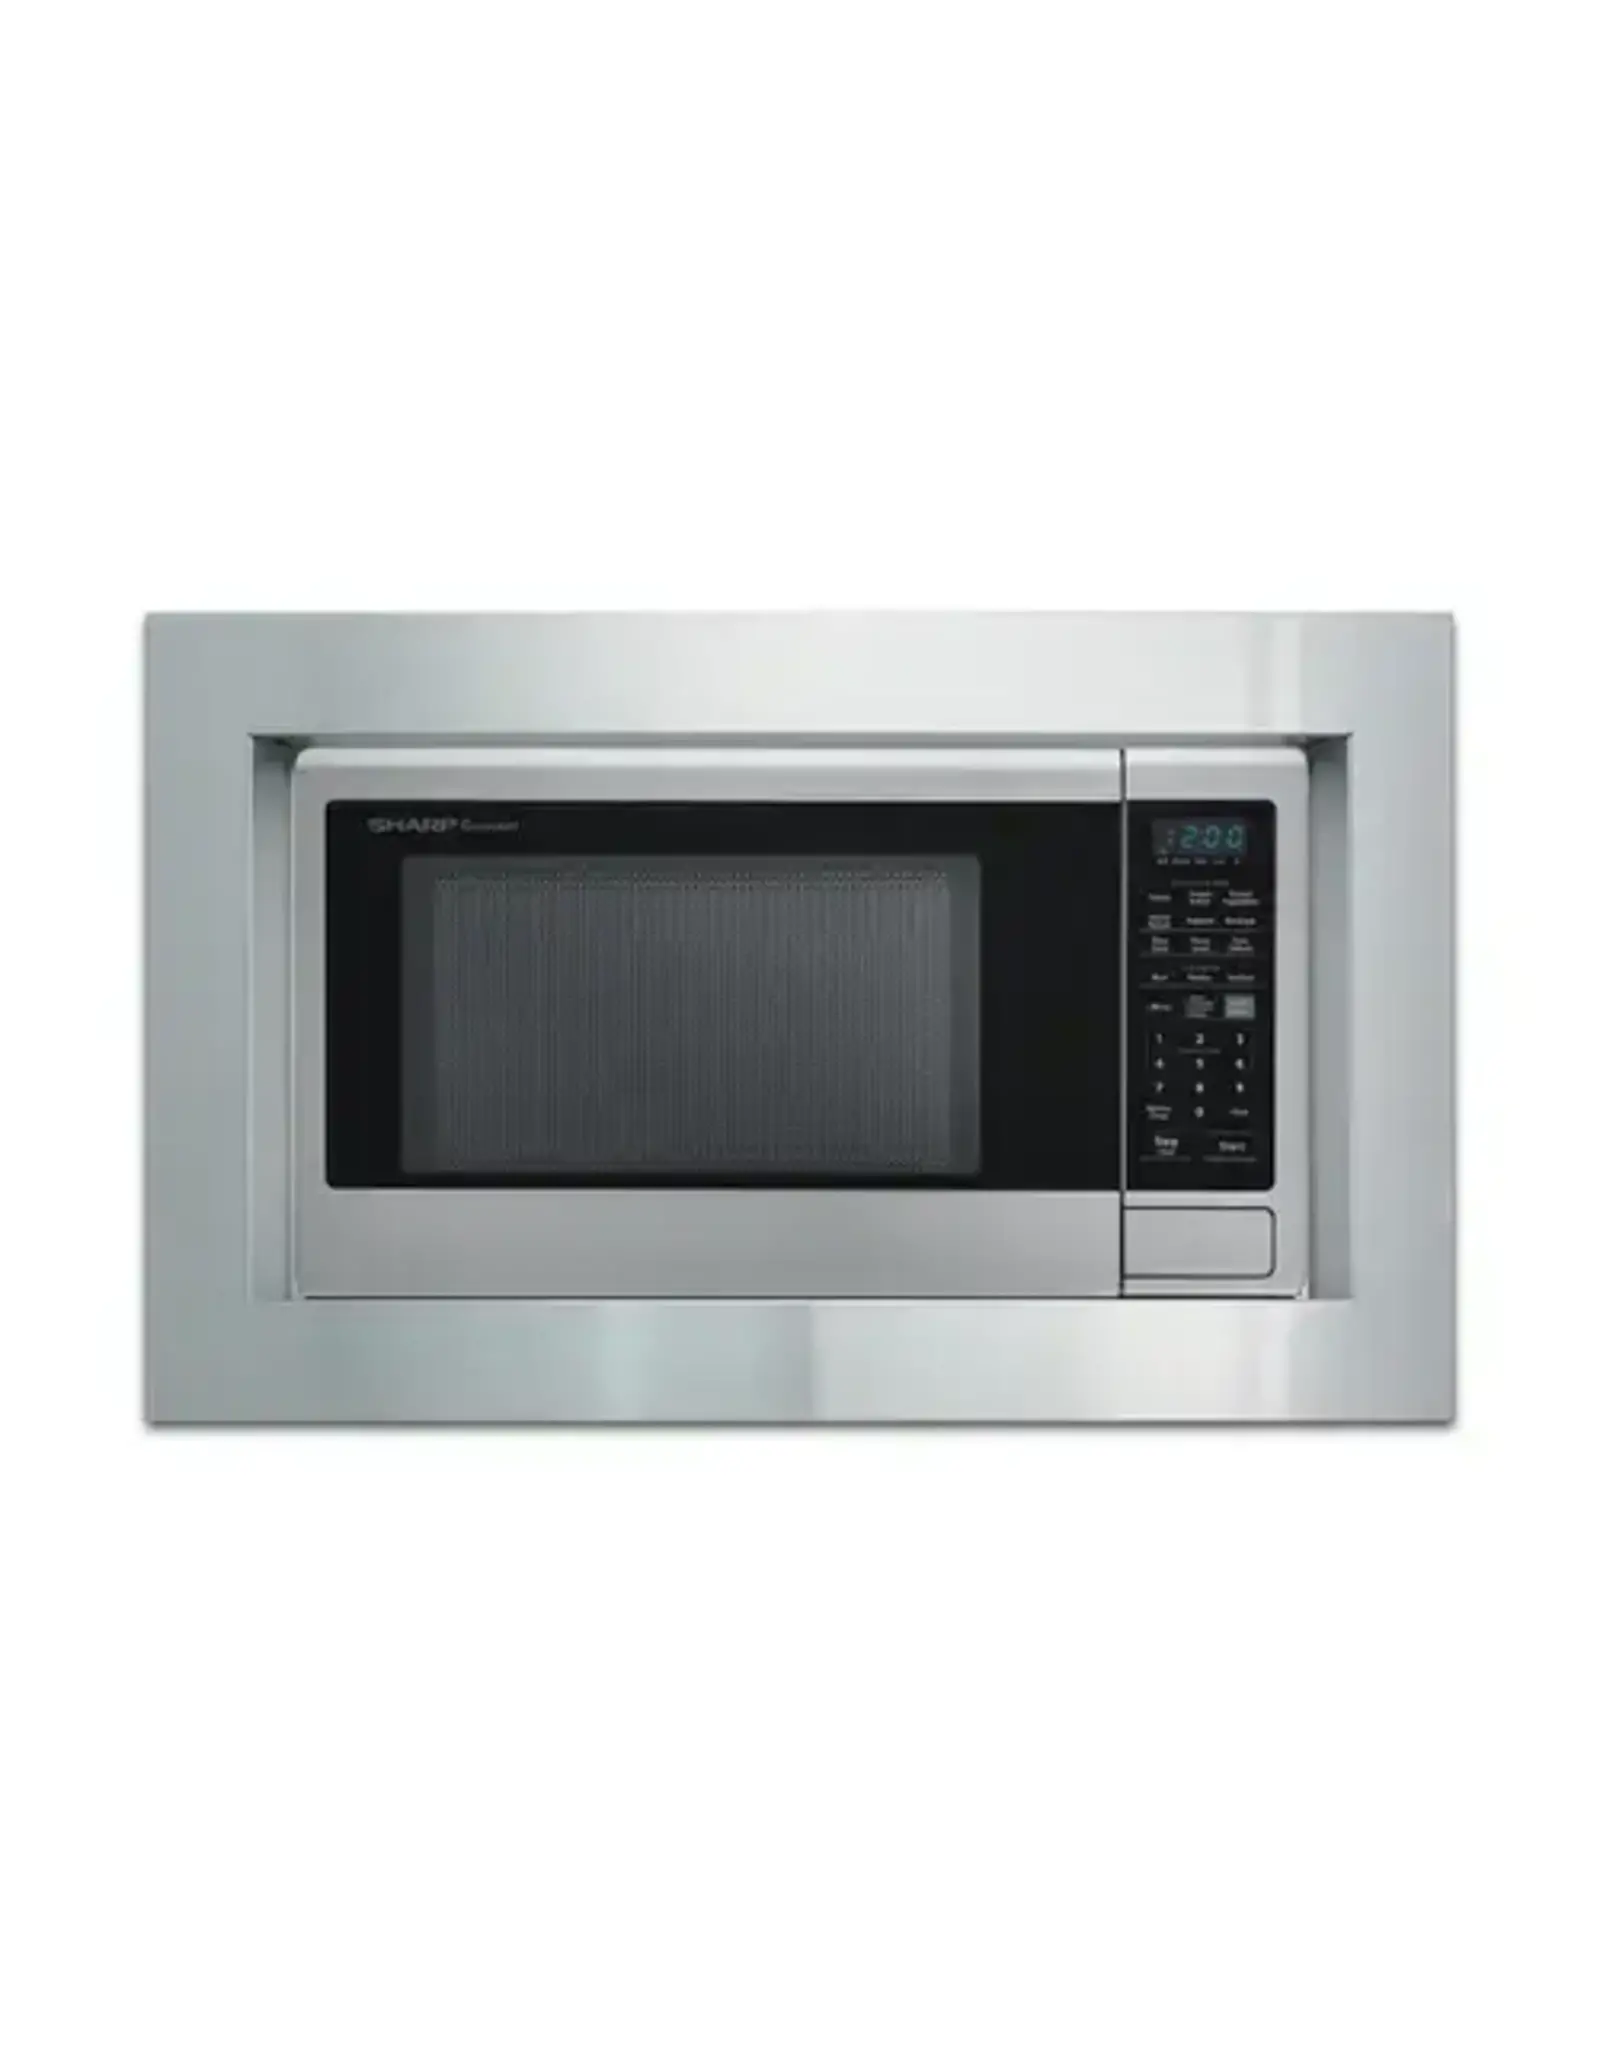 RK56S27F Sharp 27" Stainless Steel Built-in Microwave Oven Trim Kit